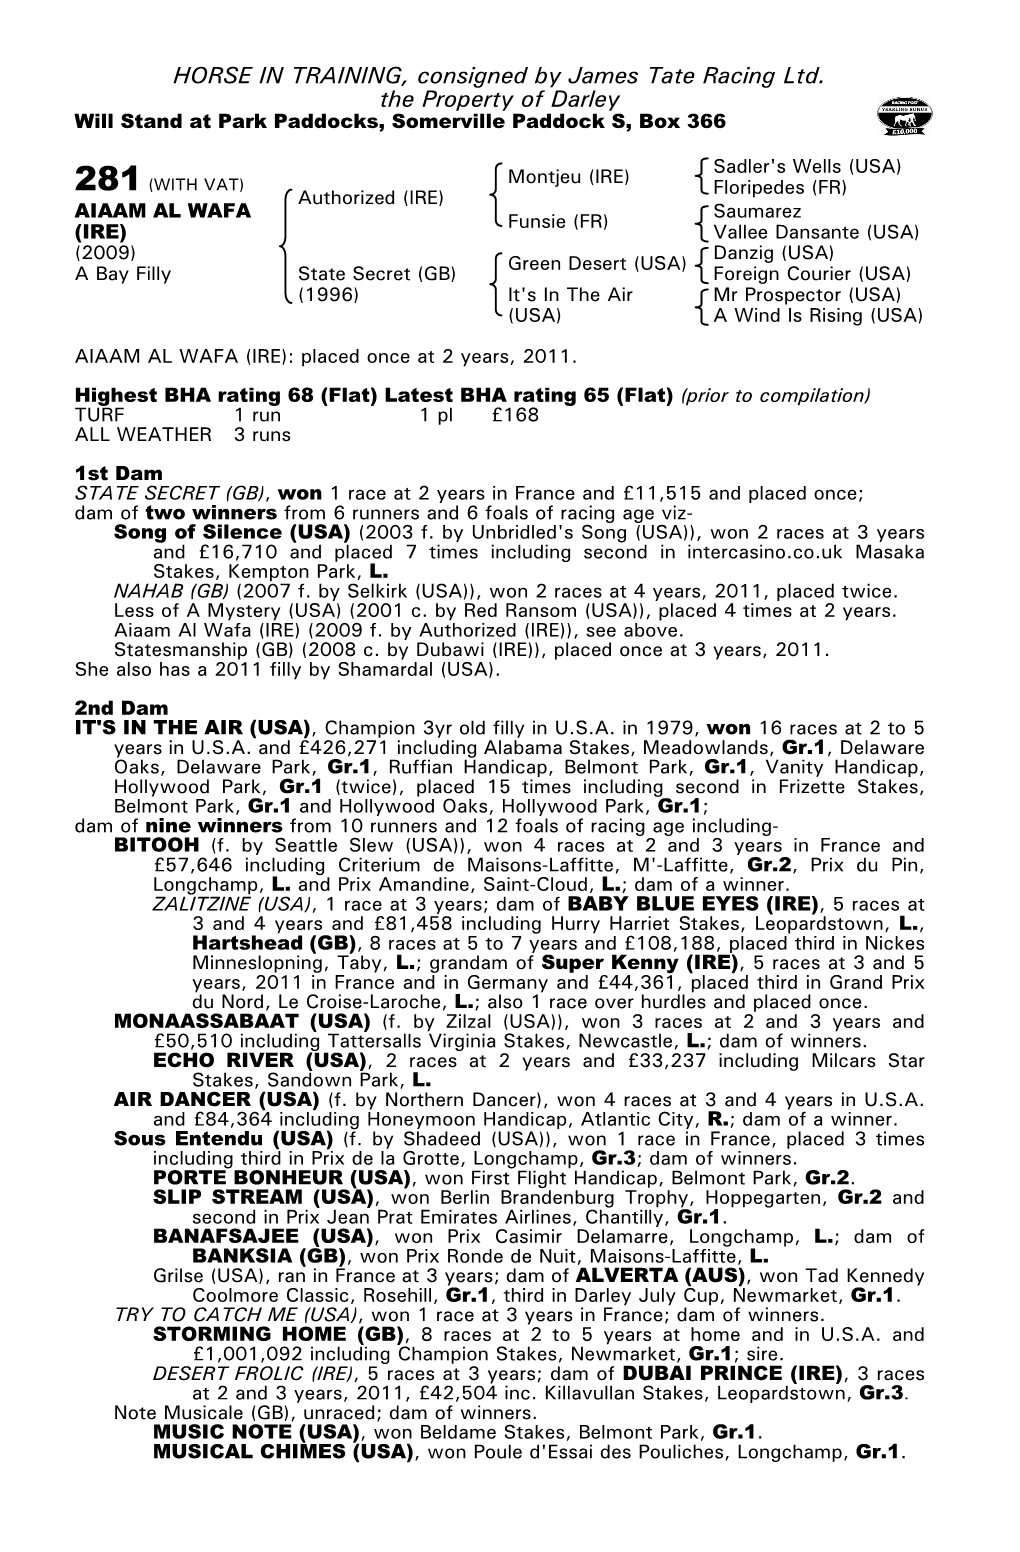 HORSE in TRAINING, Consigned by James Tate Racing Ltd. the Property of Darley Will Stand at Park Paddocks, Somerville Paddock S, Box 366